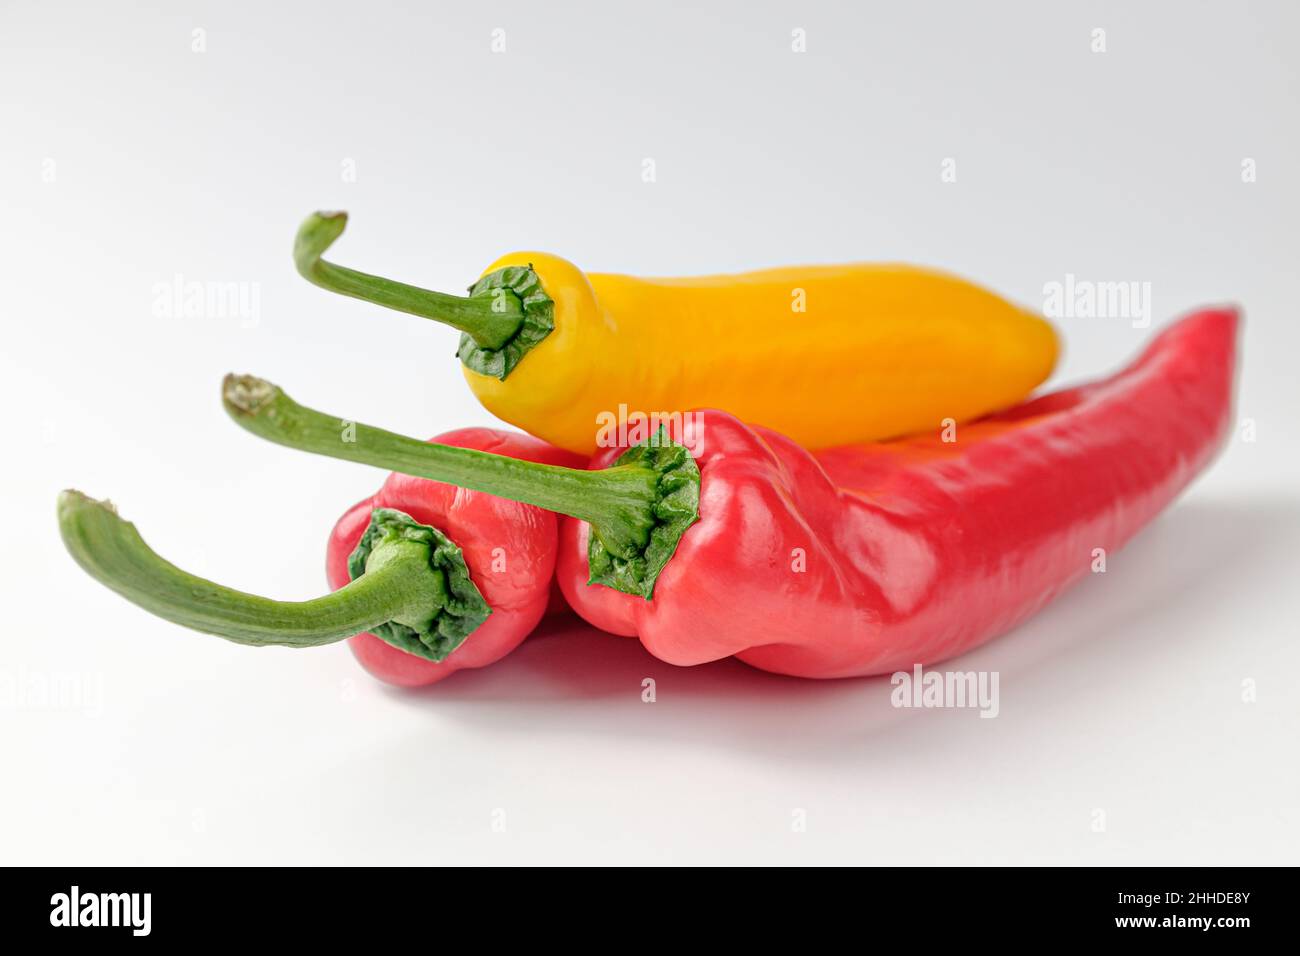 Vegetables with high sugar content. Vegetables with a crunchy texture. Pepper vegetables Stock Photo